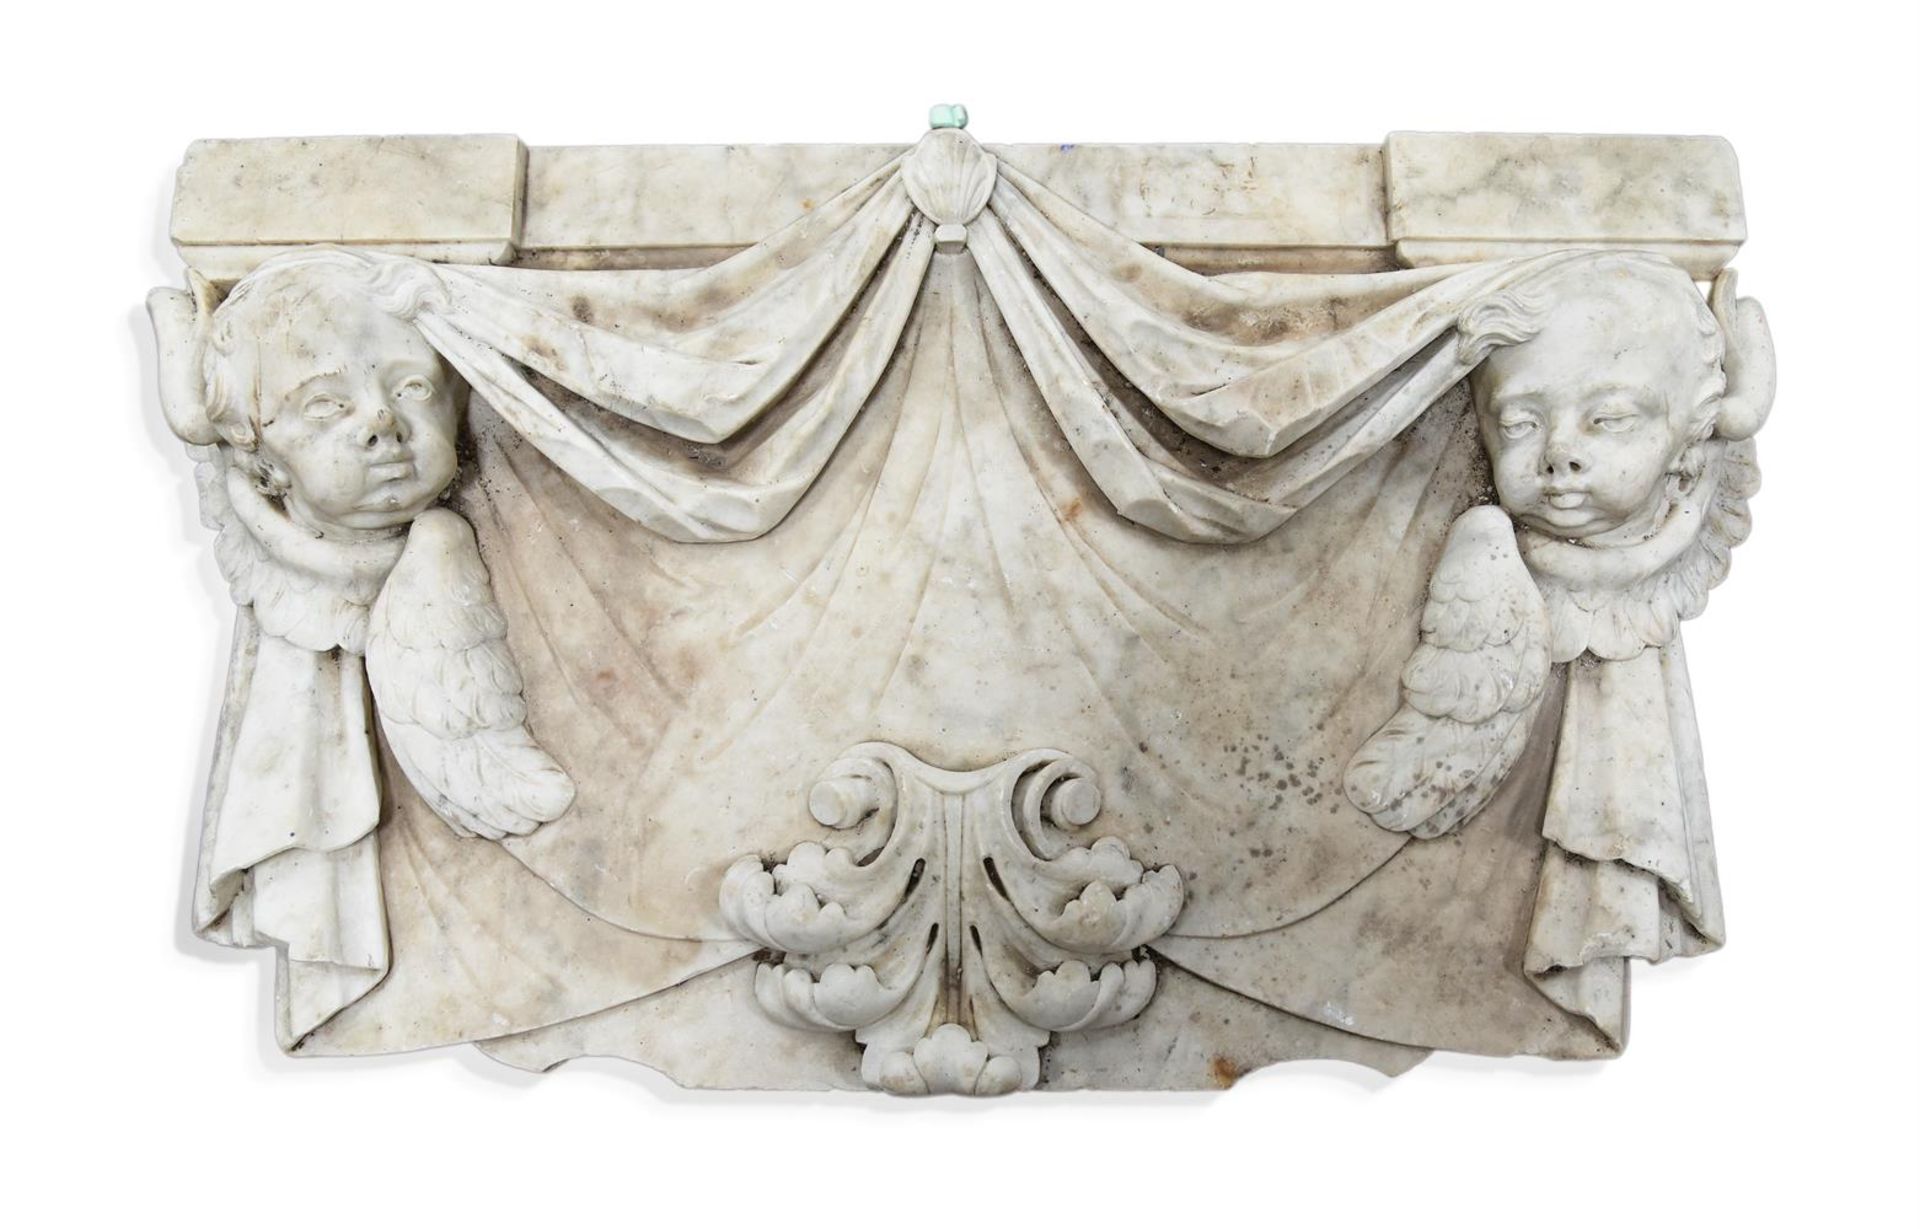 A GEORGE I WHITE MARBLE FRIEZE CARVED WITH PUTTI MASKS AND SWAGS, EARLY 18TH CENTURY